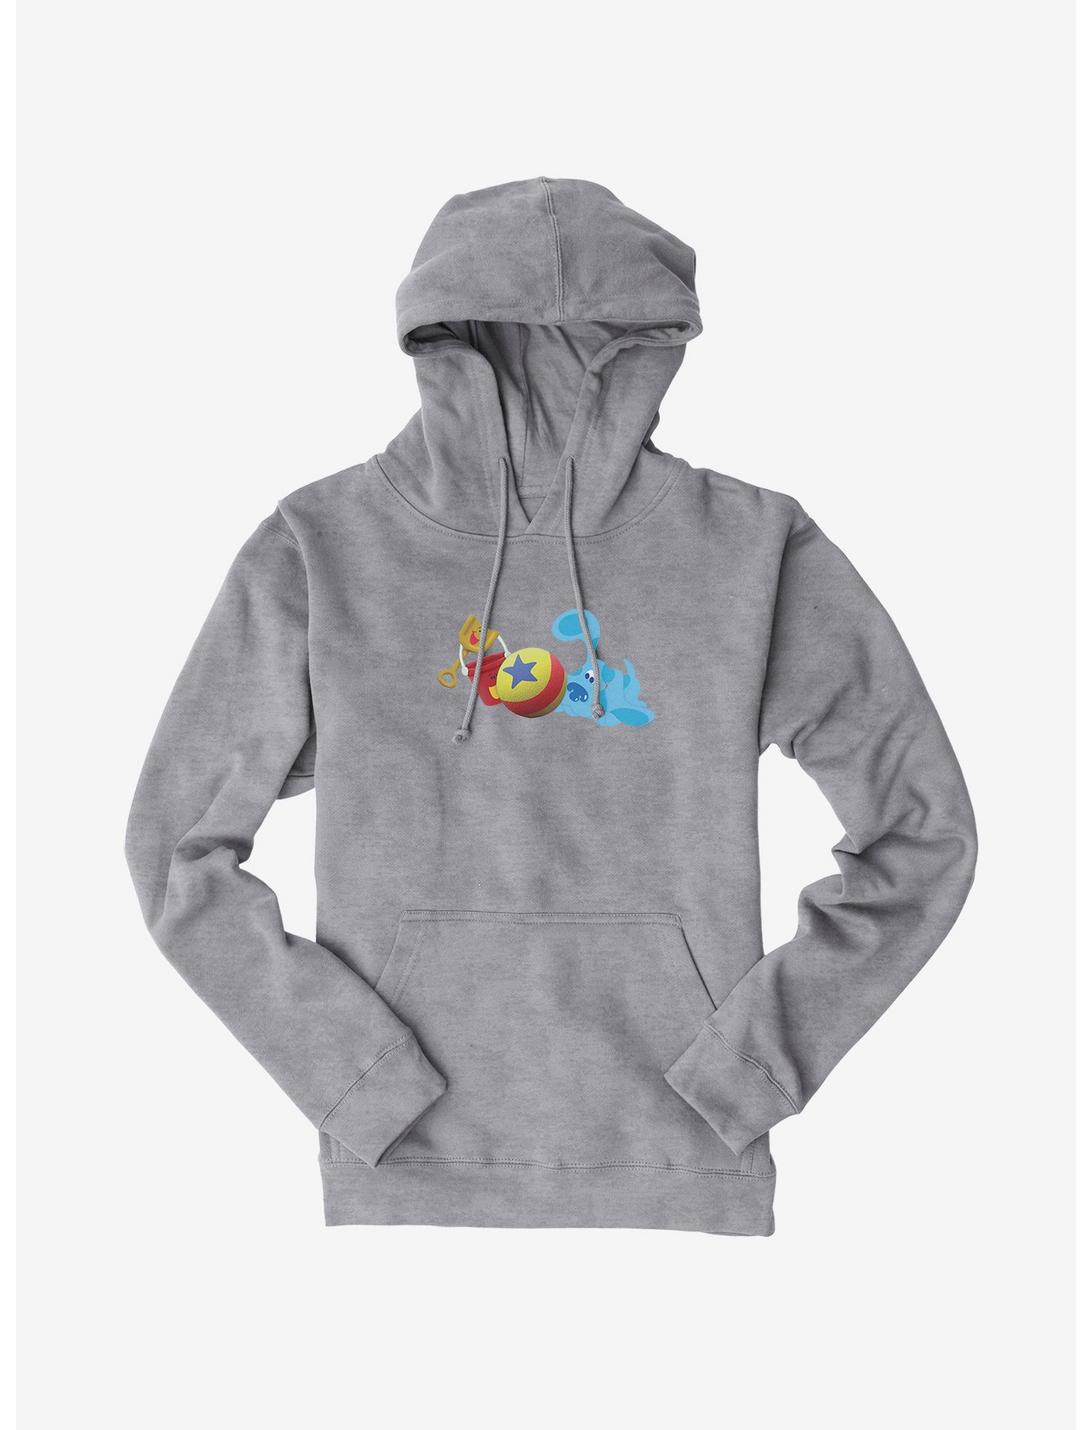 Blue's Clues Shovel And Pail Playtime Hoodie, HEATHER GREY, hi-res